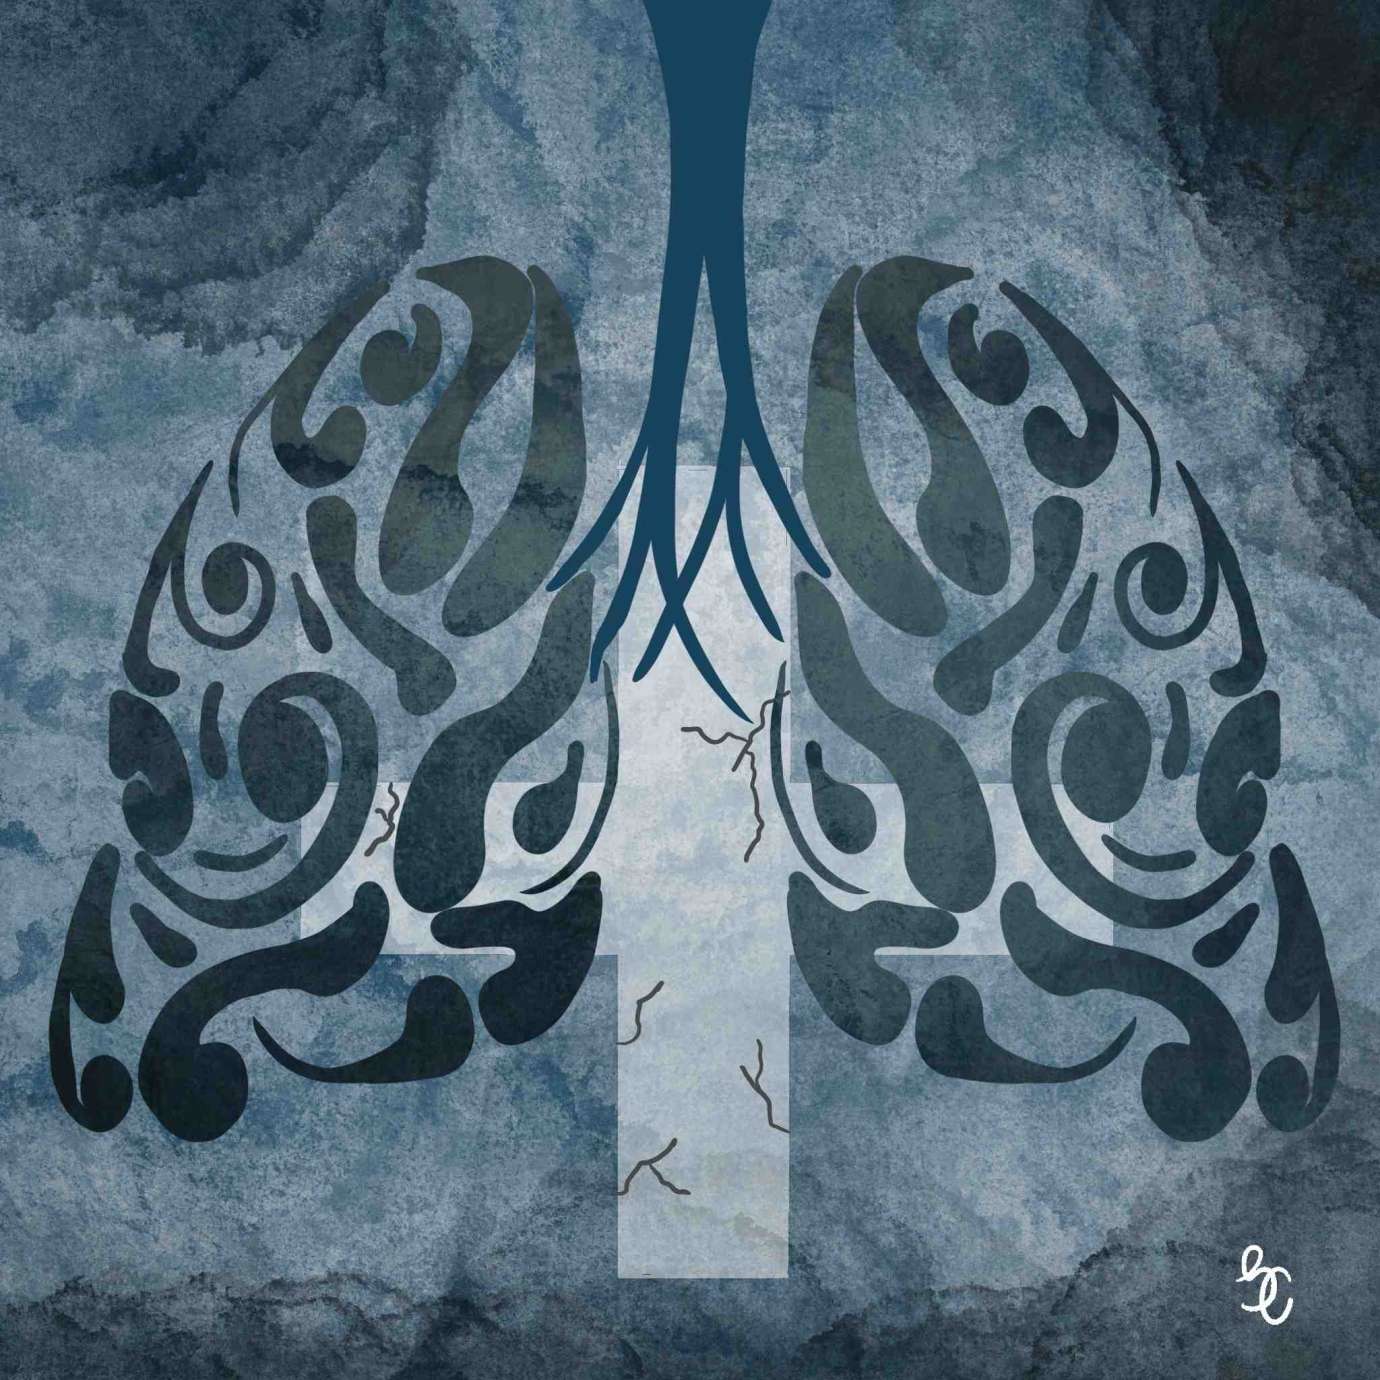 A dark gray and blue illustration of two lungs by Mayanthi Jaywardena